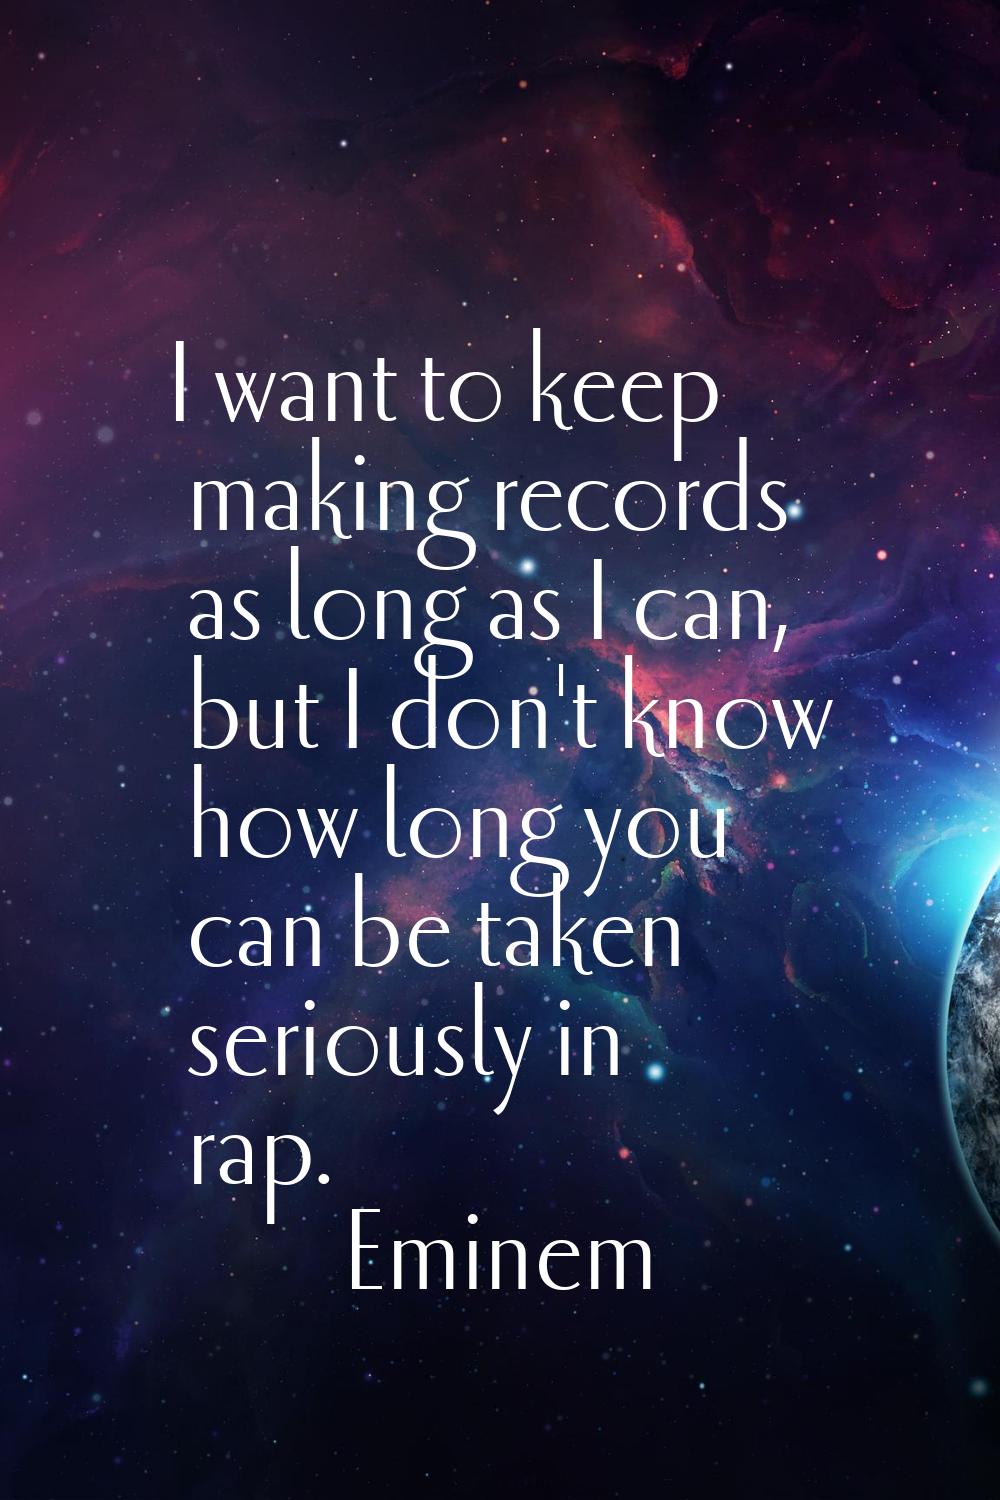 I want to keep making records as long as I can, but I don't know how long you can be taken seriousl